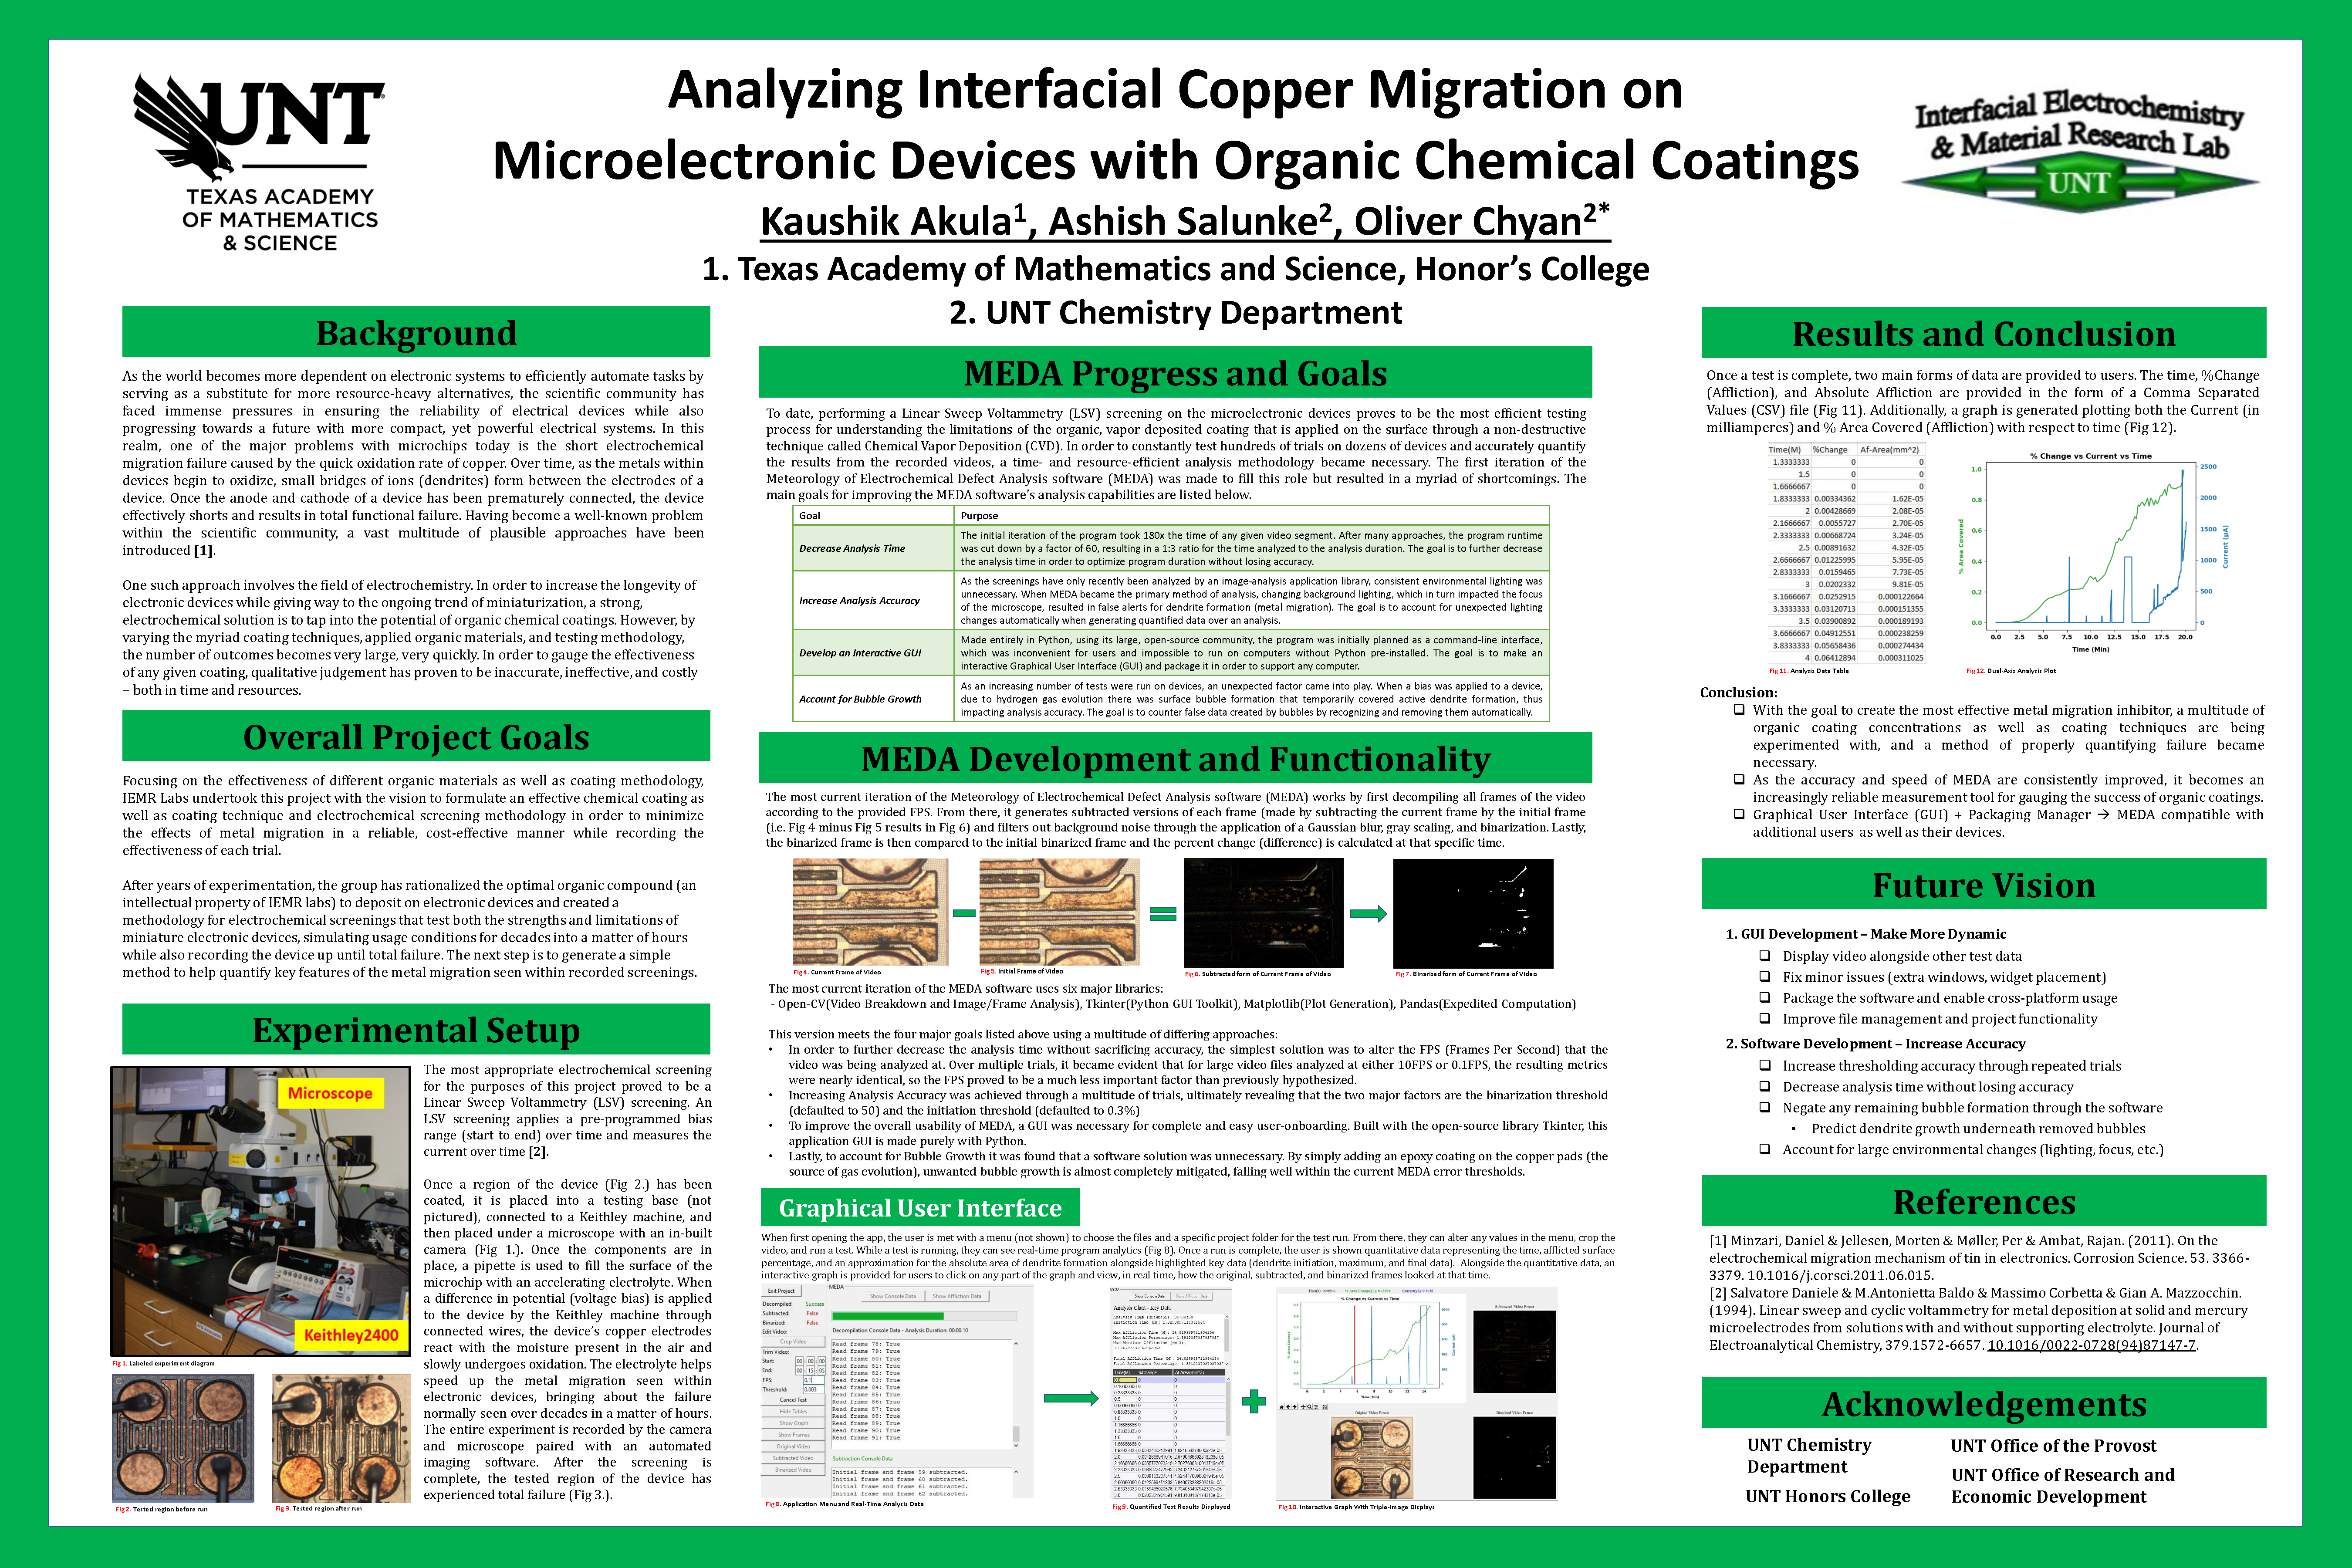 Analyzing Interfacial Copper Migration on Microelectronic Devices with Organic Chemical Coatings